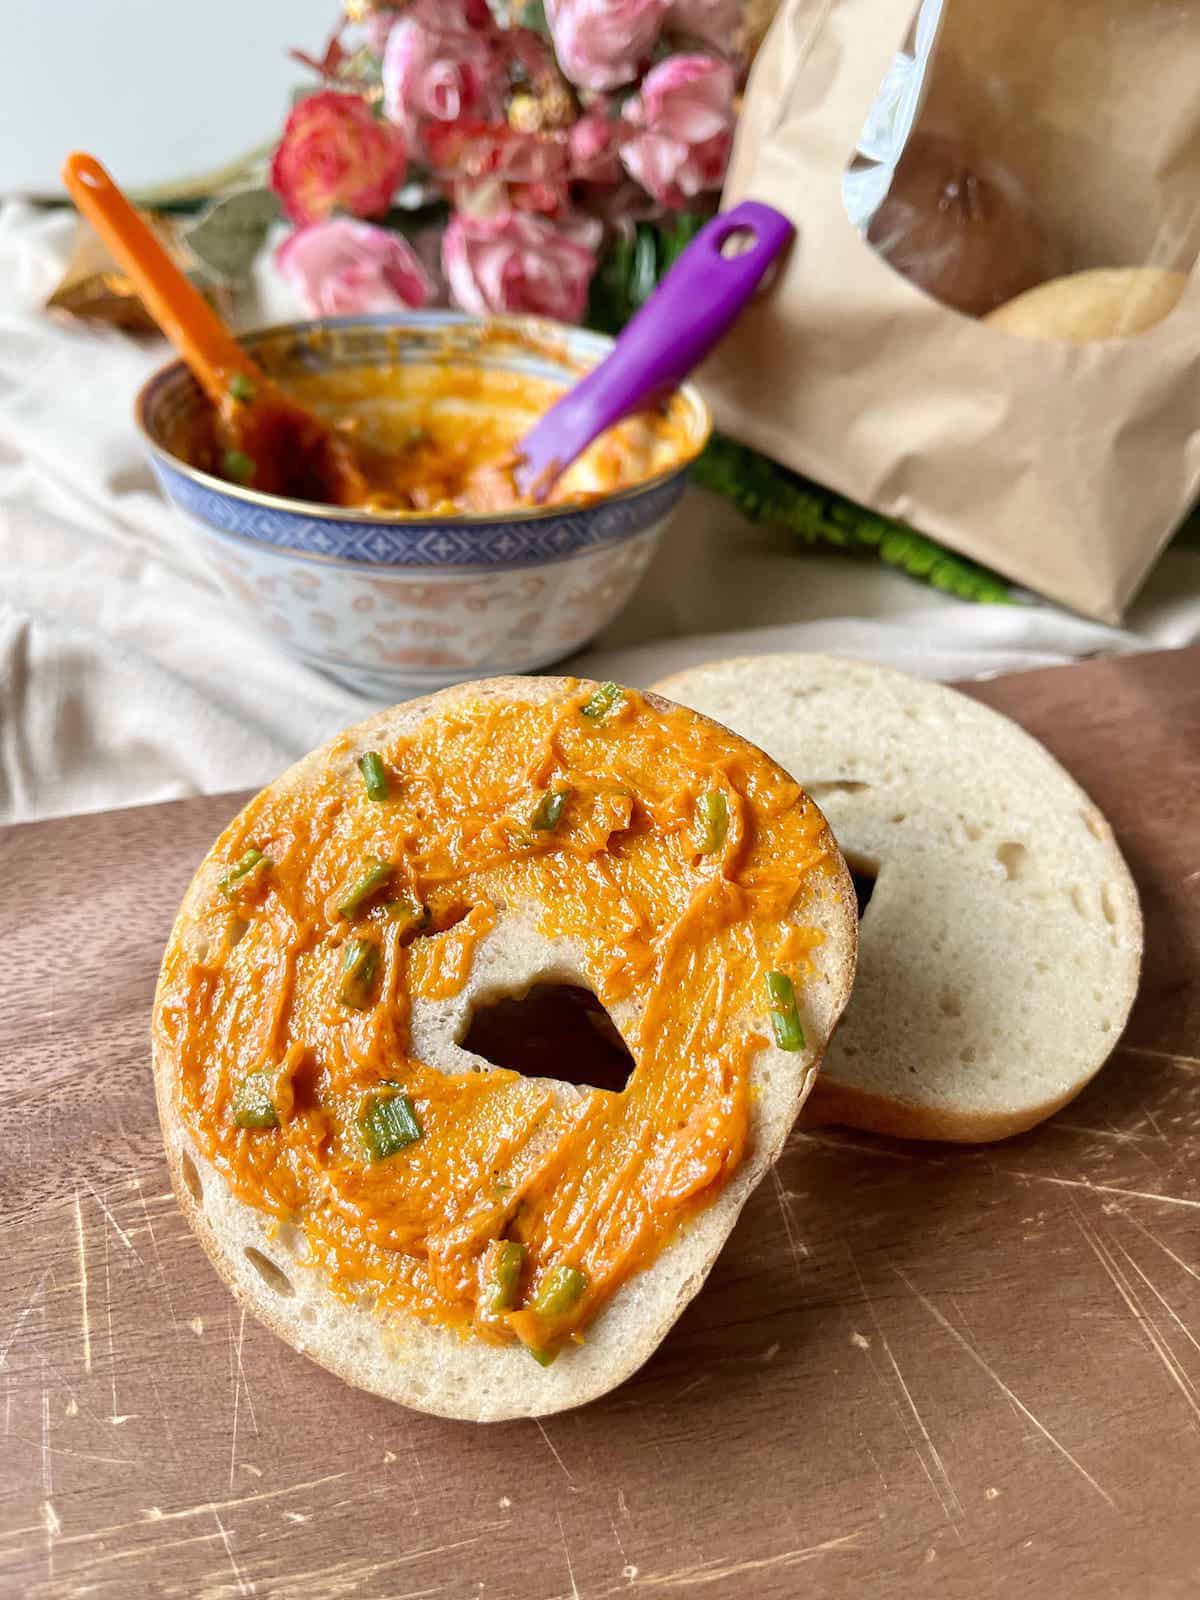 Gochujang butter and spring onions slathered on a bagel.